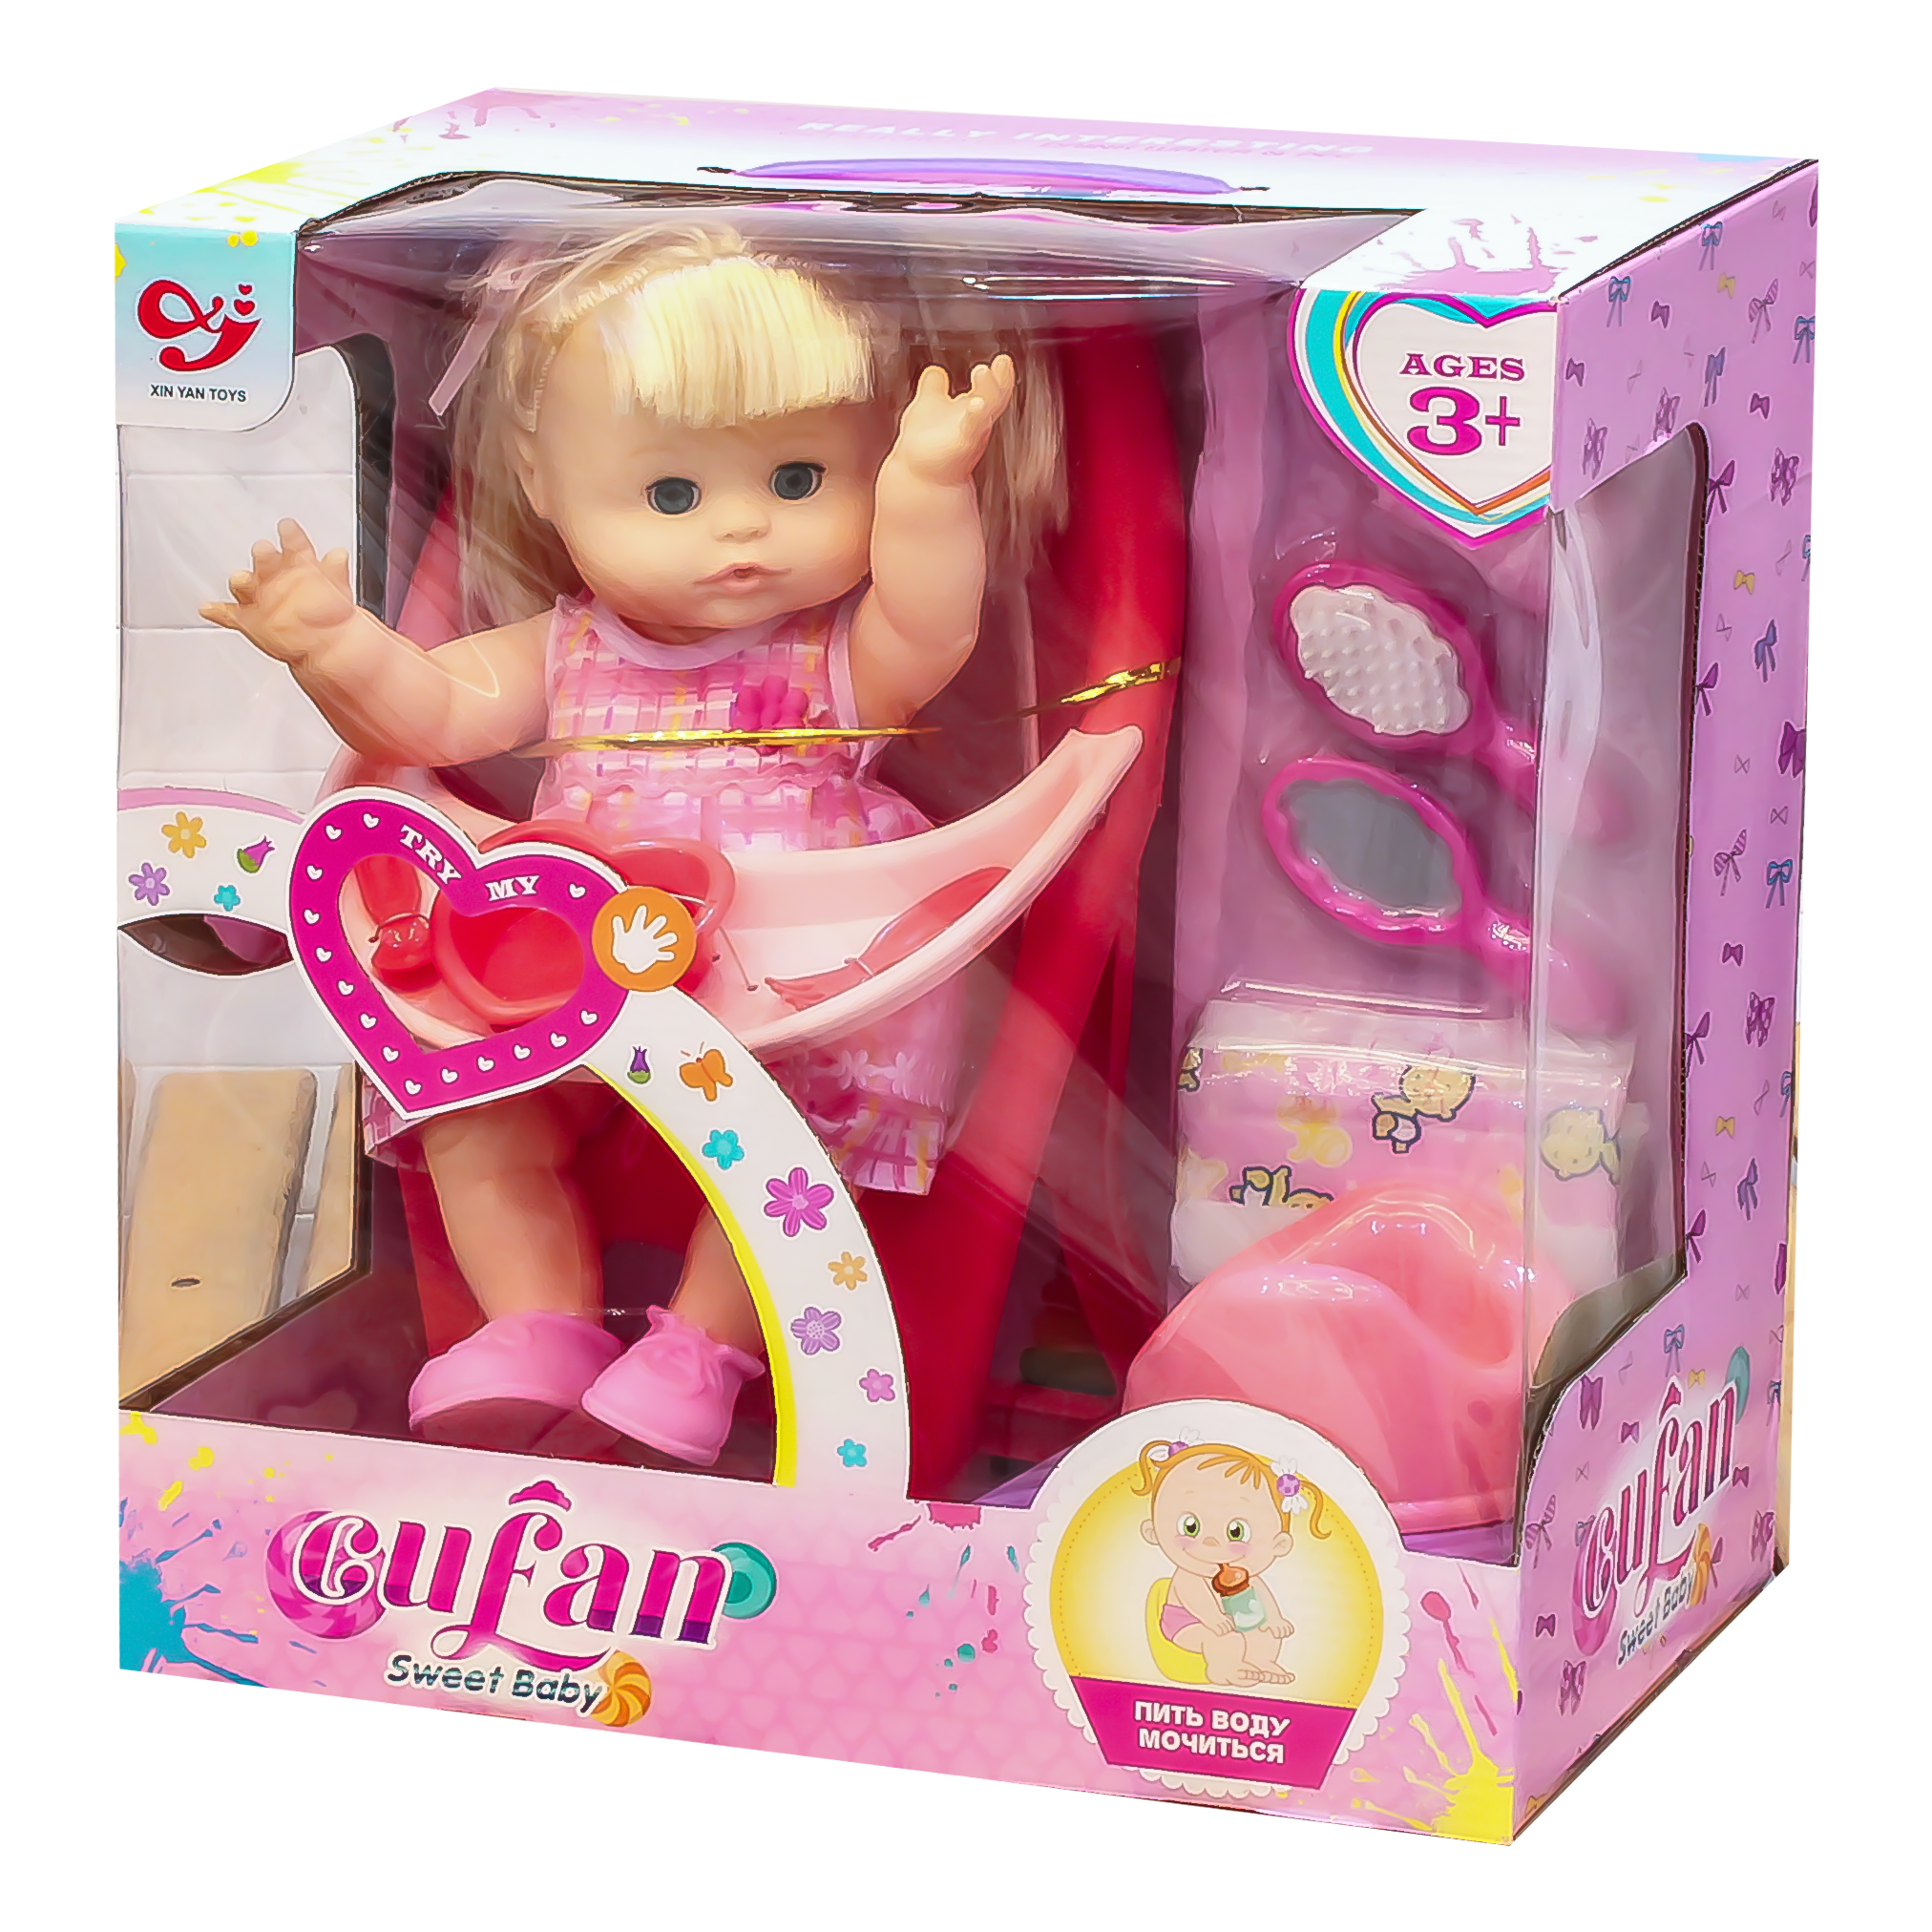 Cufan Sweet Baby Born Doll With Feeding Chair And Accessories Play Set For Girls - 2199A